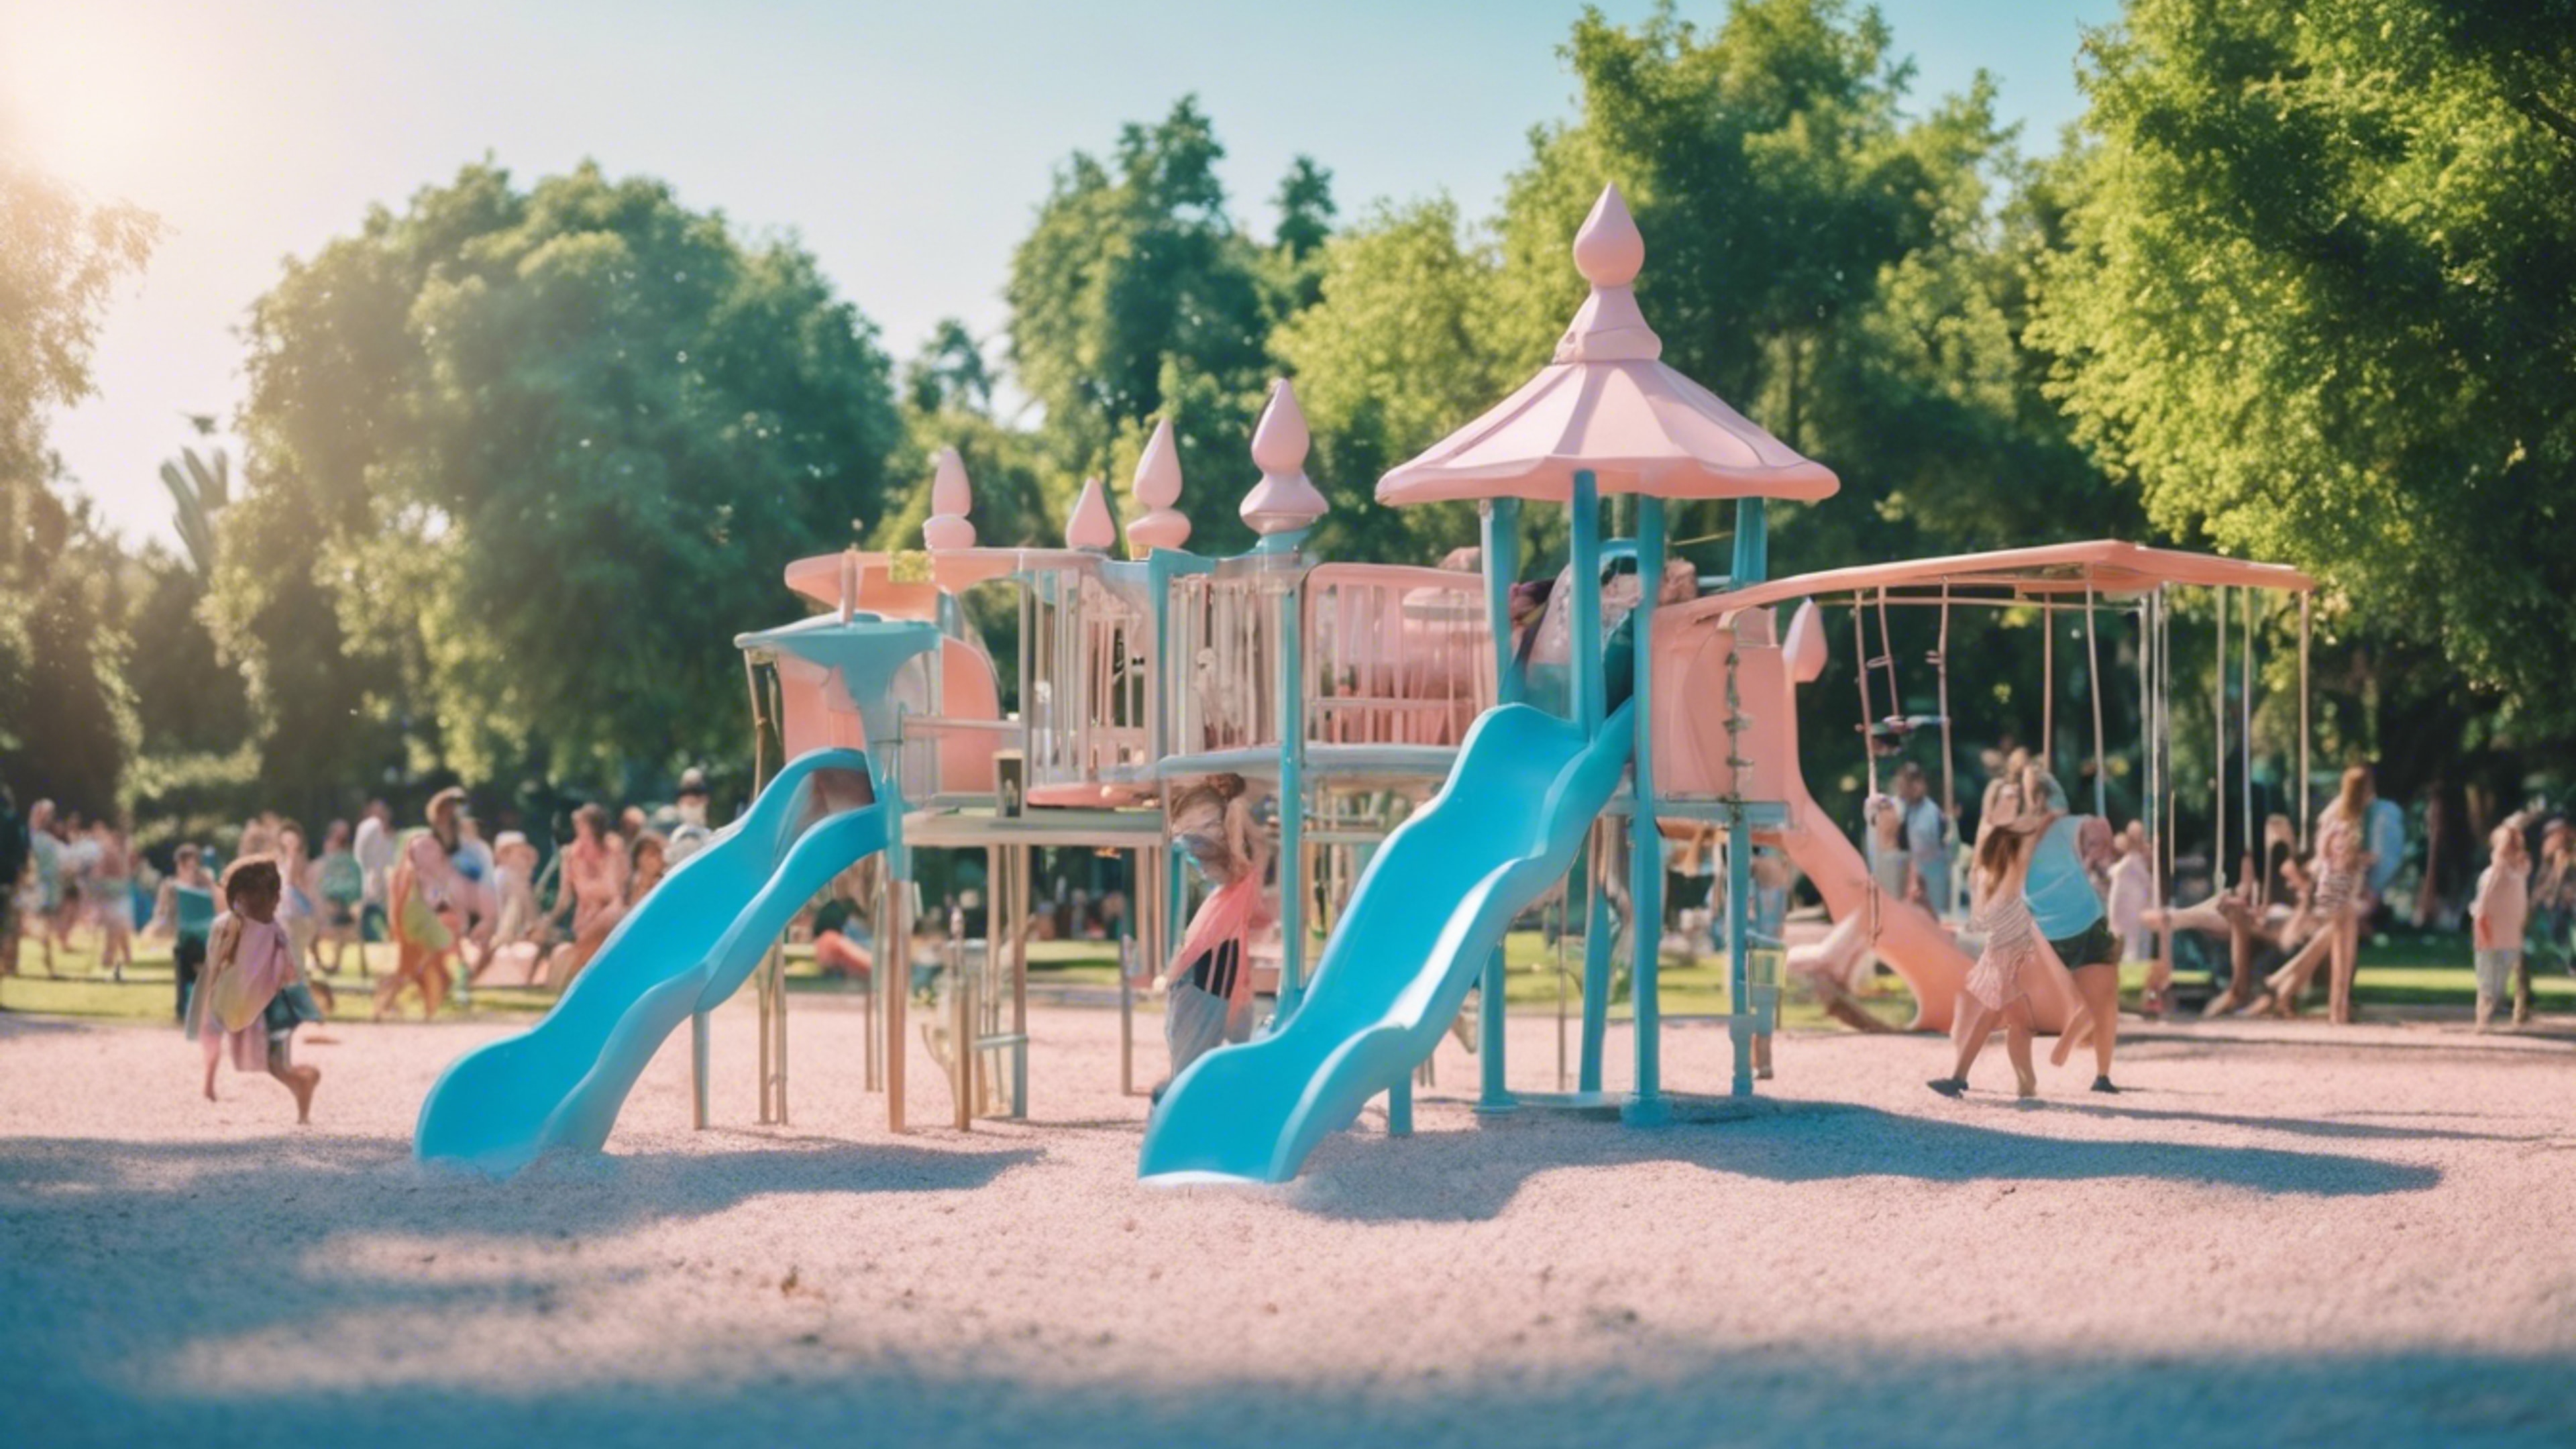 A bright pastel blue playground in a lively public park, bustling with kids. Обои[d7bf1102c17e4700a3c3]